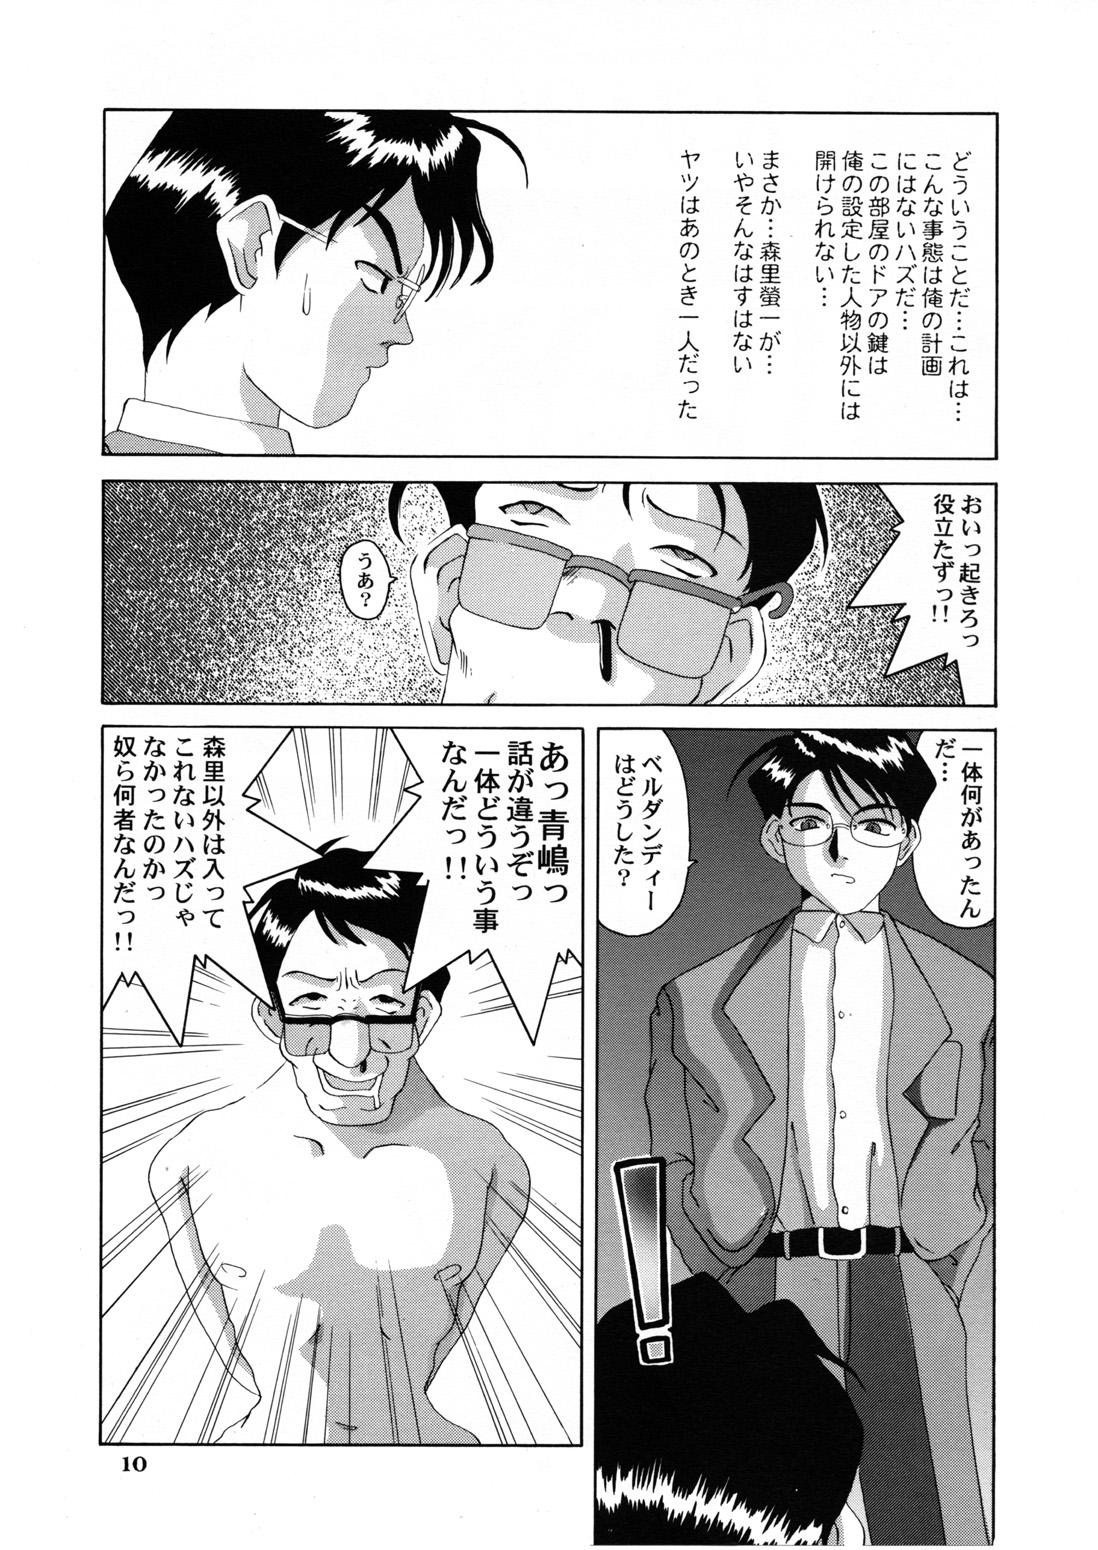 Old Vs Young Nightmare of My Goddess 5 - Ah my goddess Screaming - Page 10